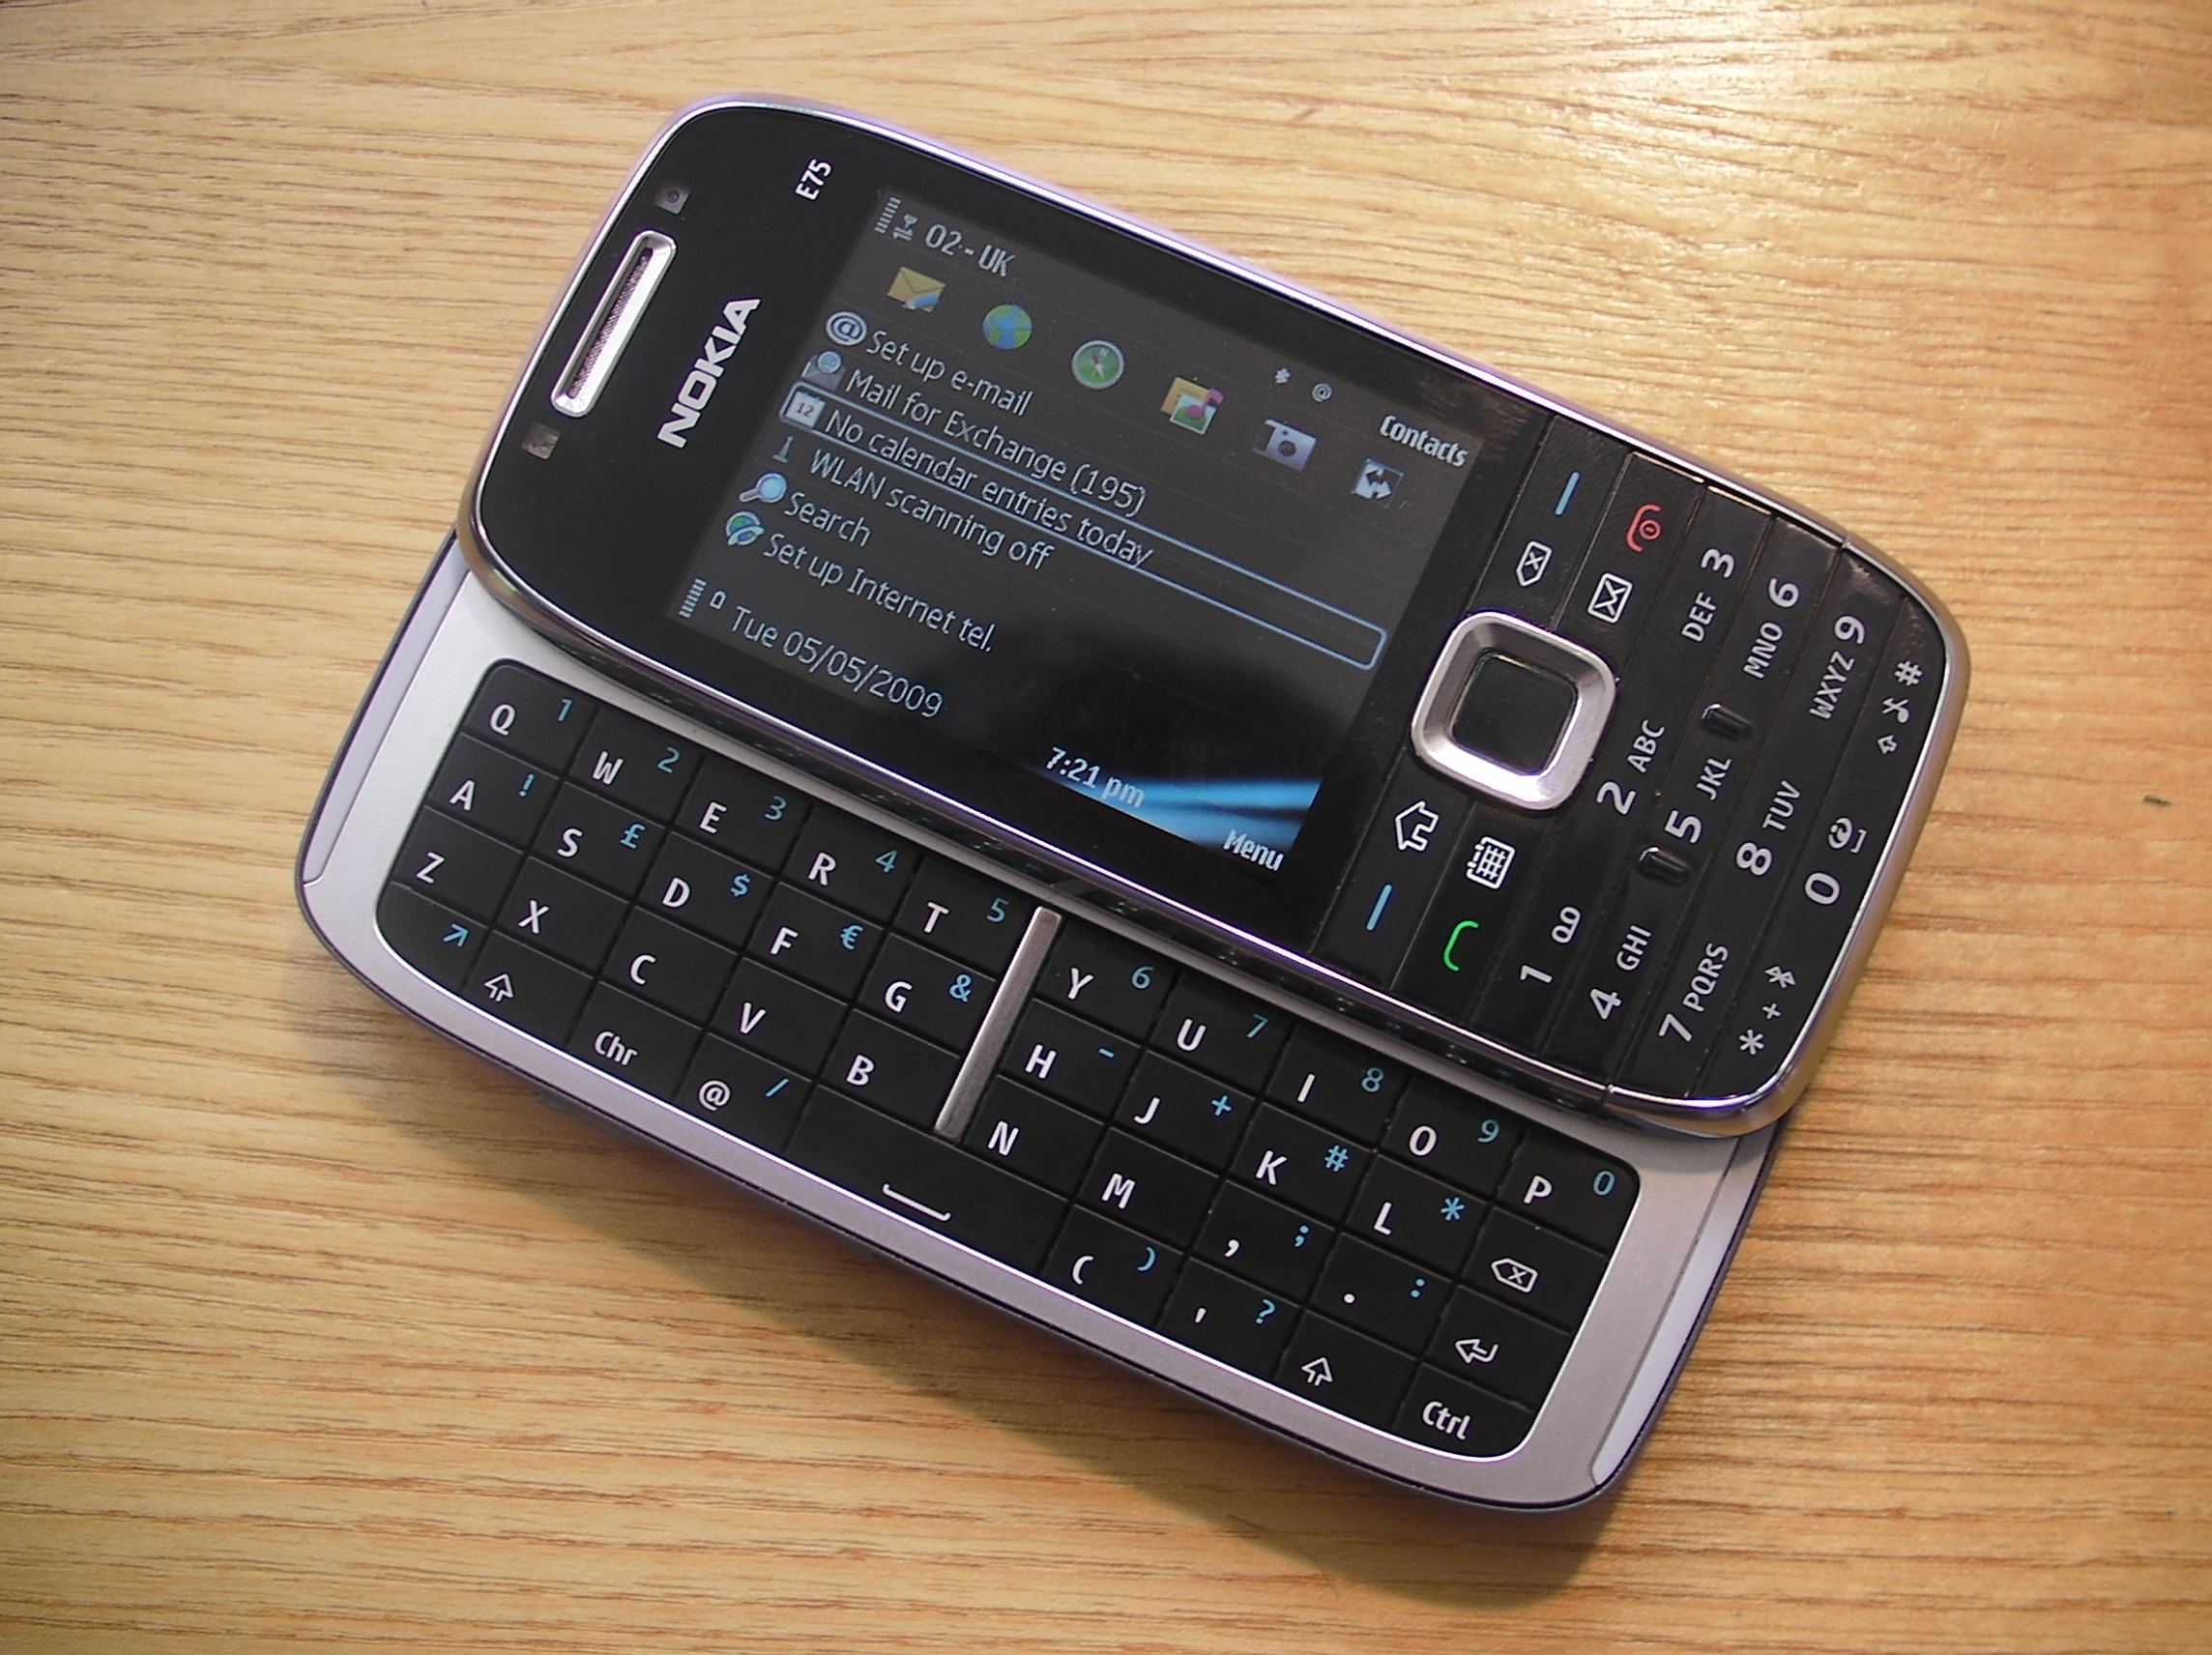 Nokia E75 - Part 1: General Design and Hardware review - All About Symbian